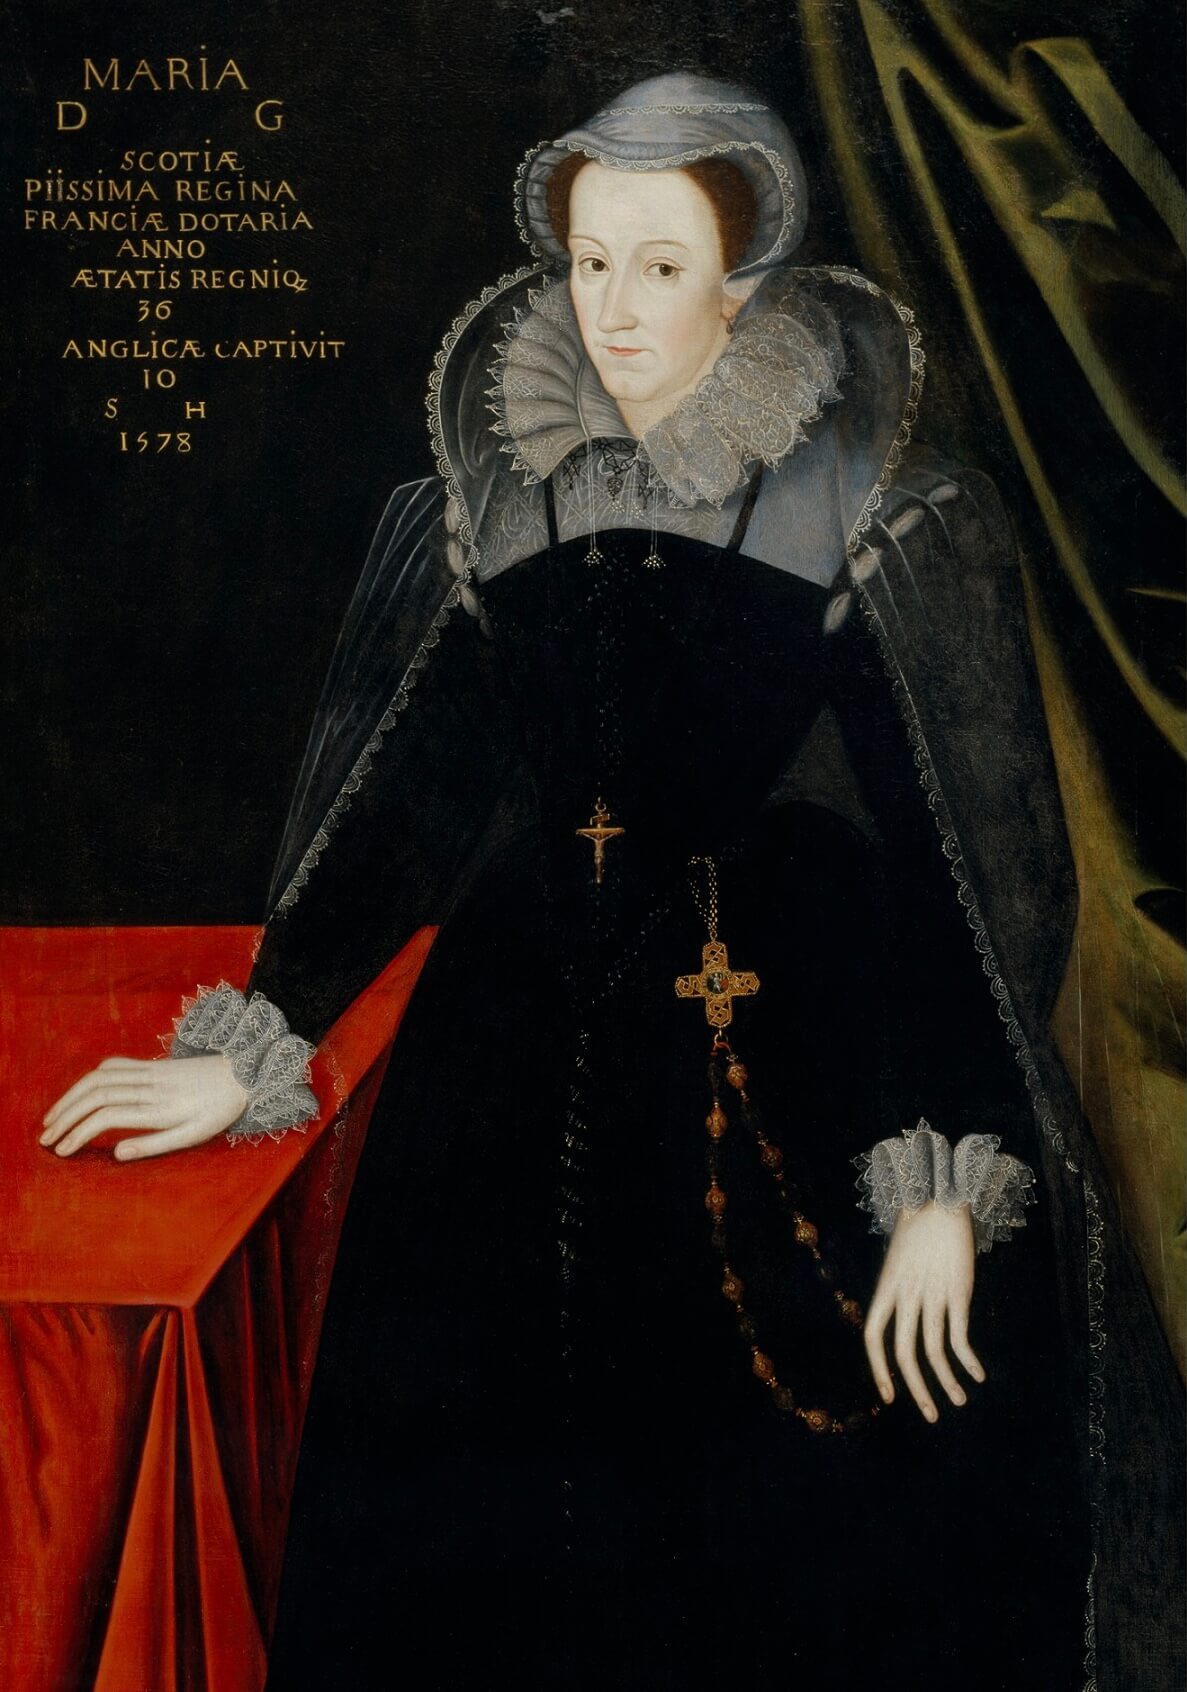 Mary, queen of Scots